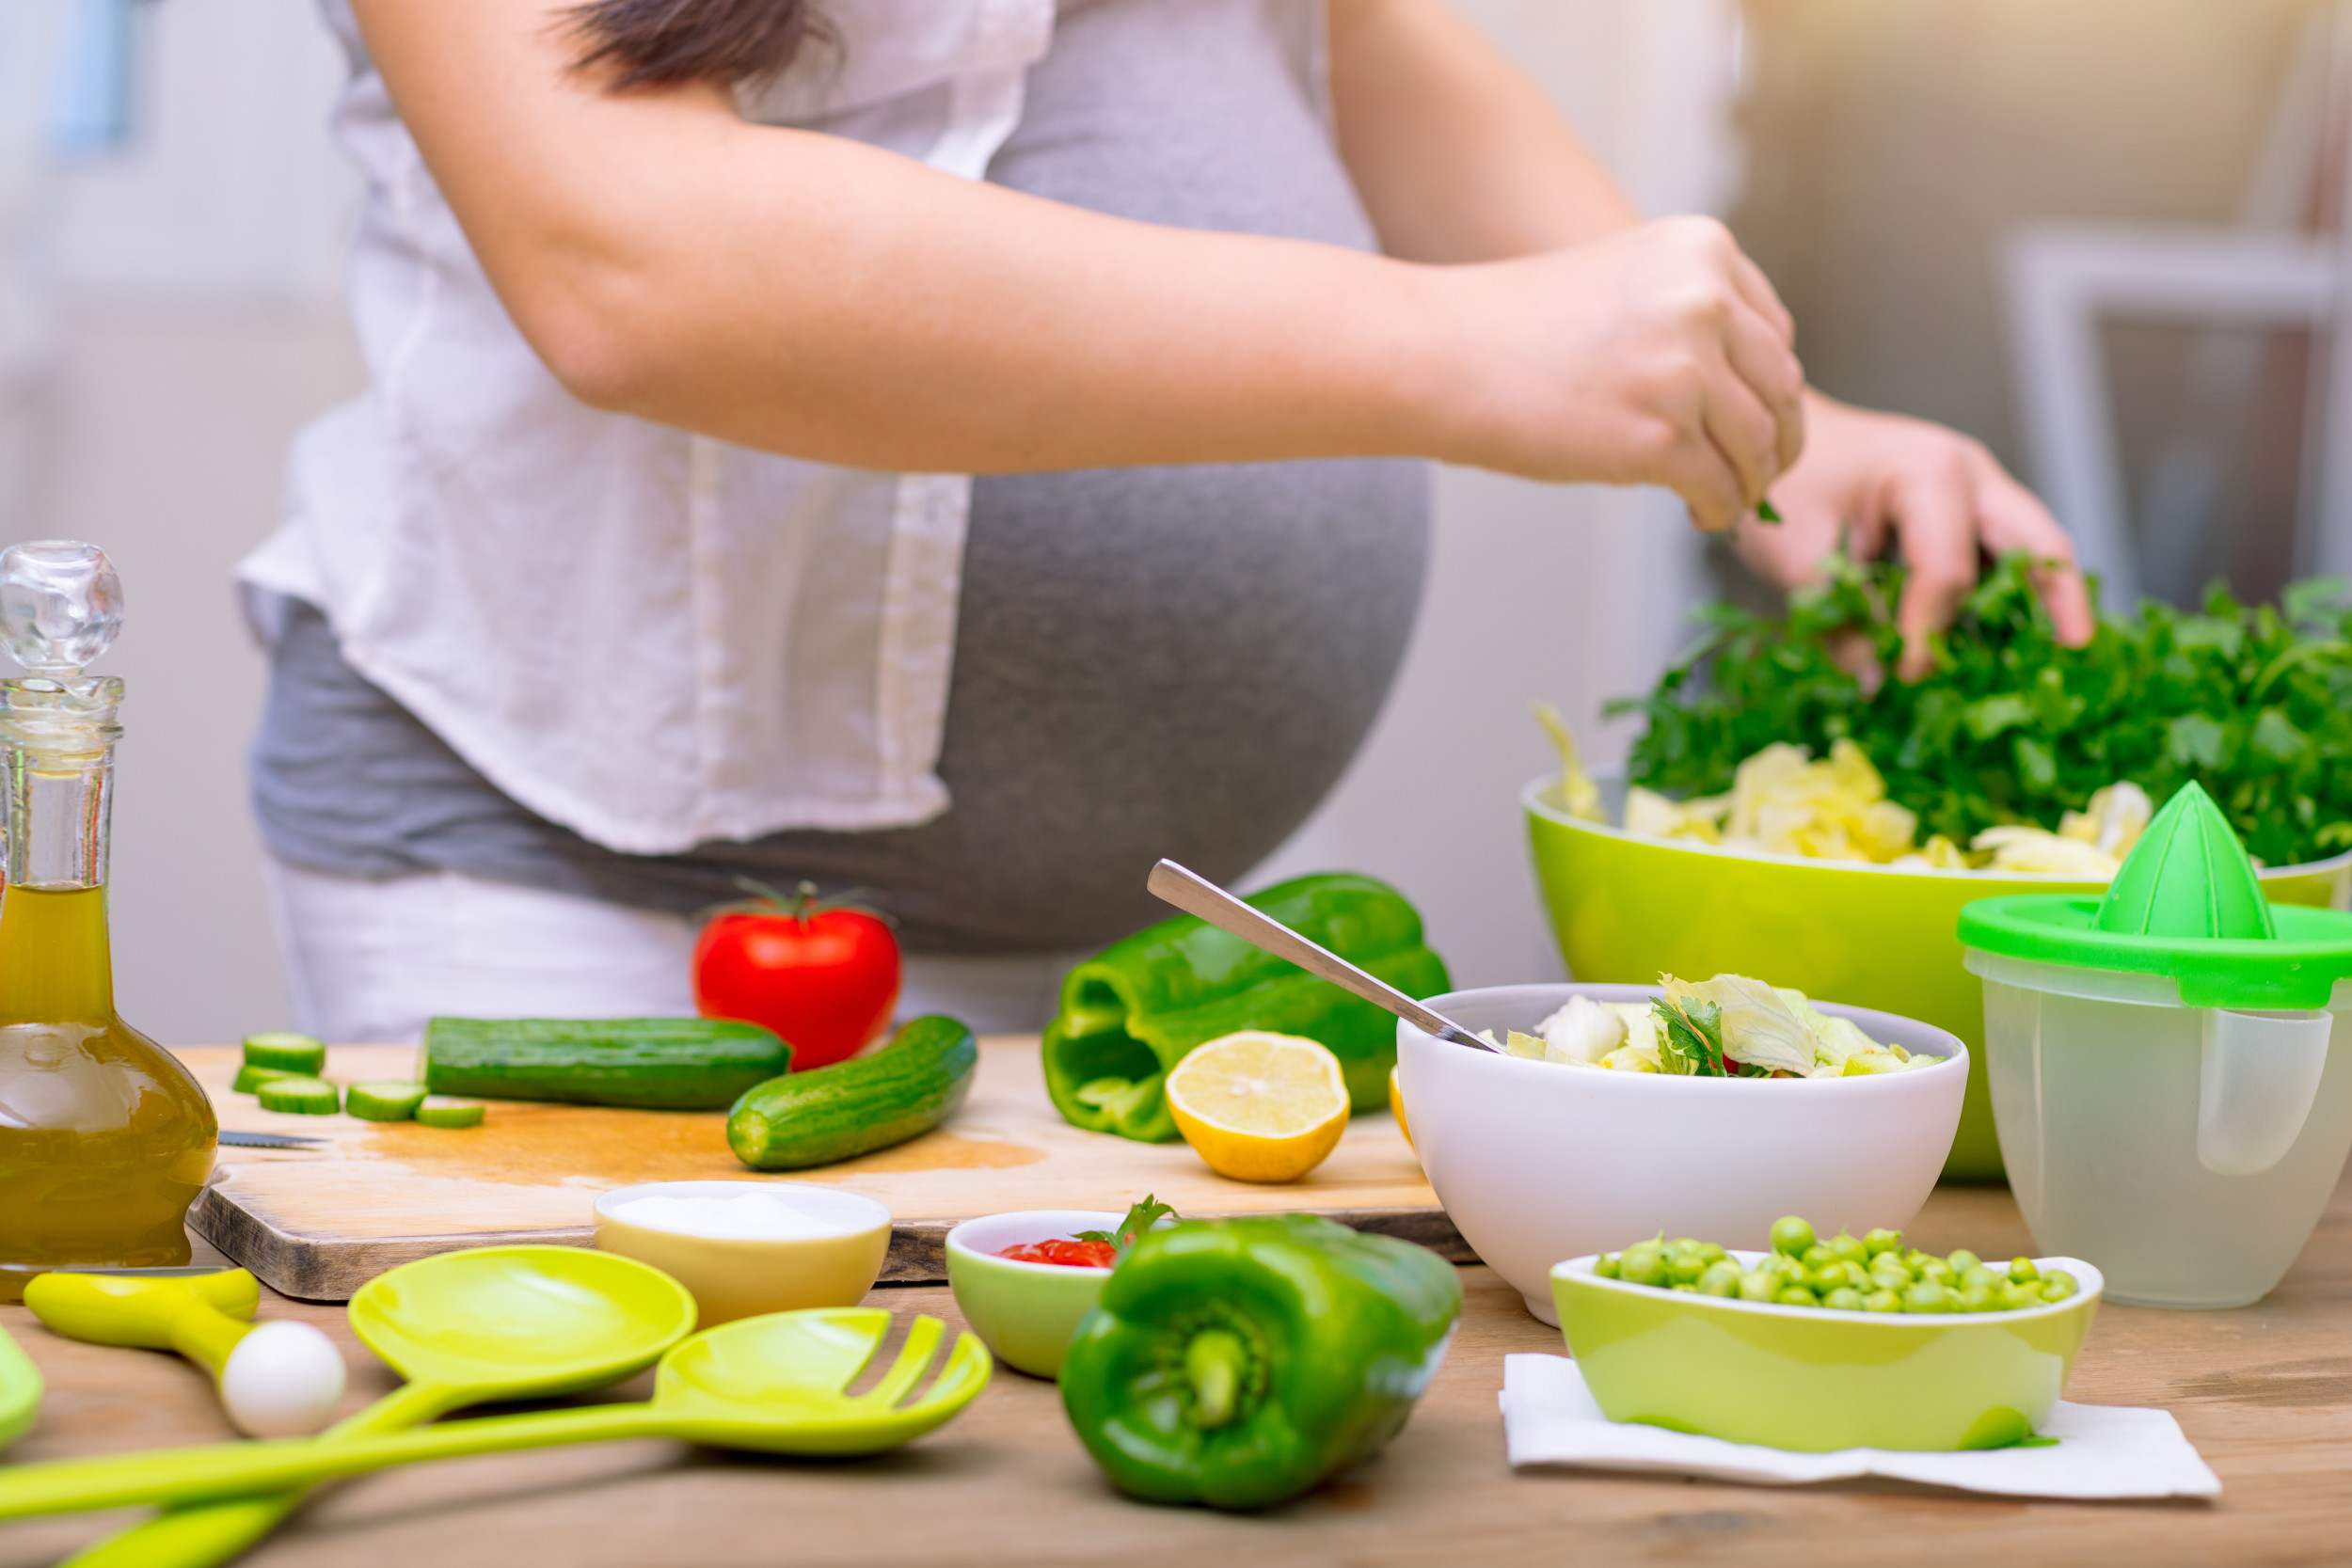 Fury as Pregnant Woman Preps Meals for When the Baby's Born, Only To Find Partner Ate It